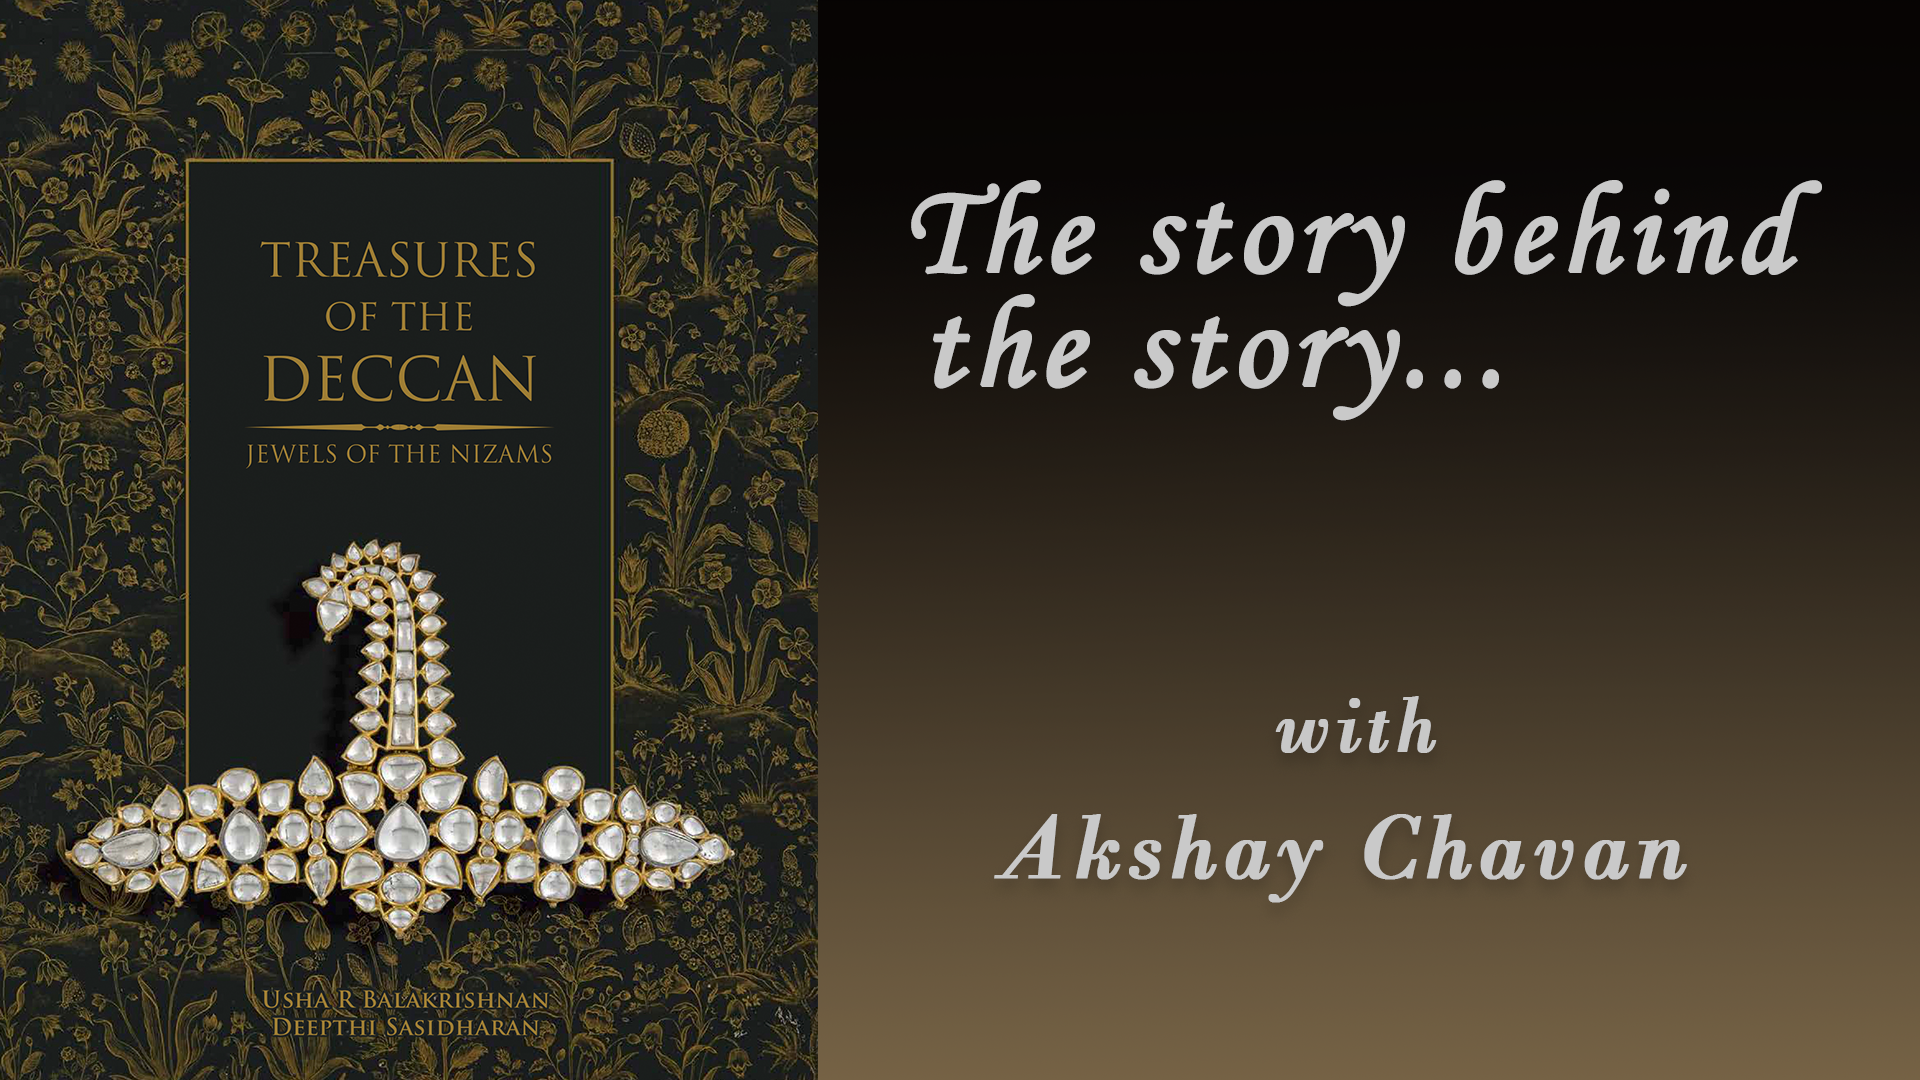 The story behind the story of the ‘Treasures of the Deccan’